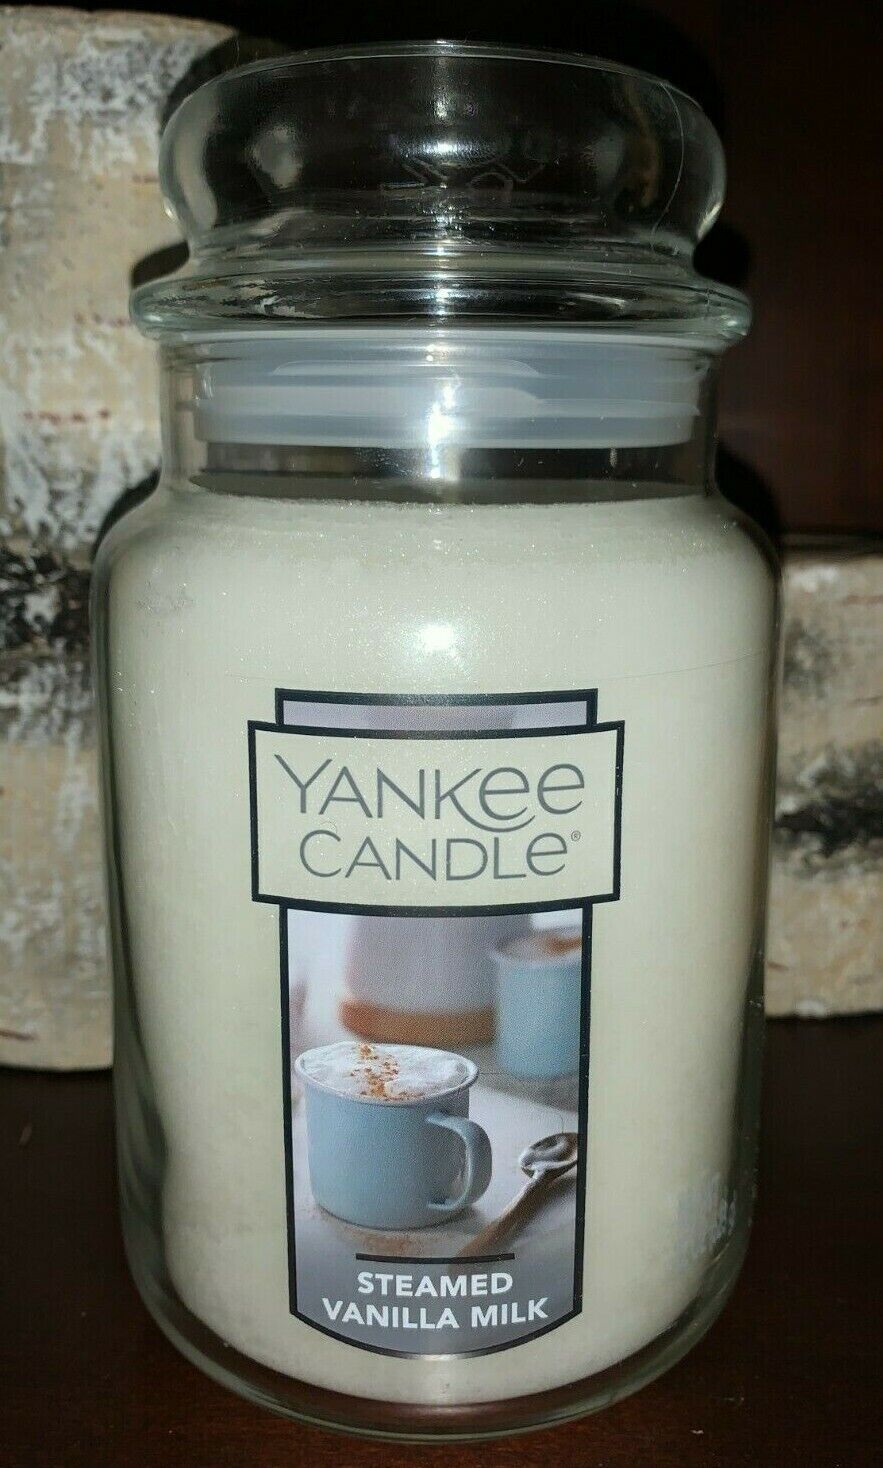 1 Yankee Candle STEAMED VANILLA MILK Large 1-Wick Classic Jar Candle 22 oz 